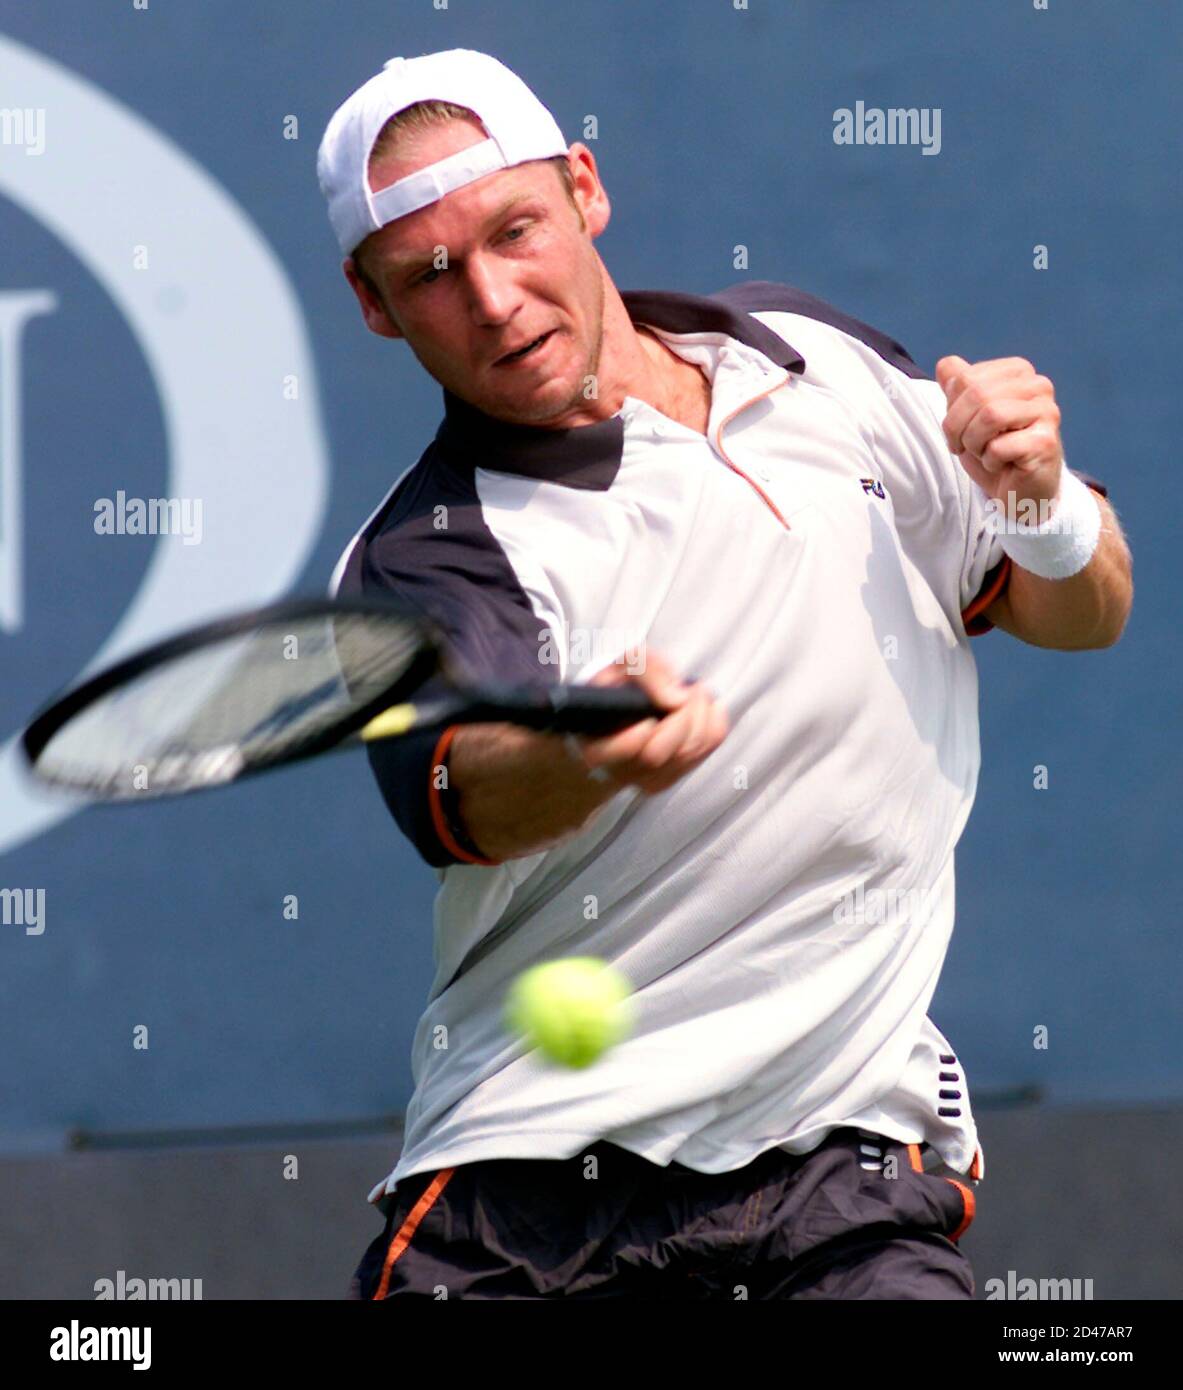 Rainer Schuttler of Germany returns to Nicolas Kiefer of Germany during the  U.S. Open Tennis Championship,